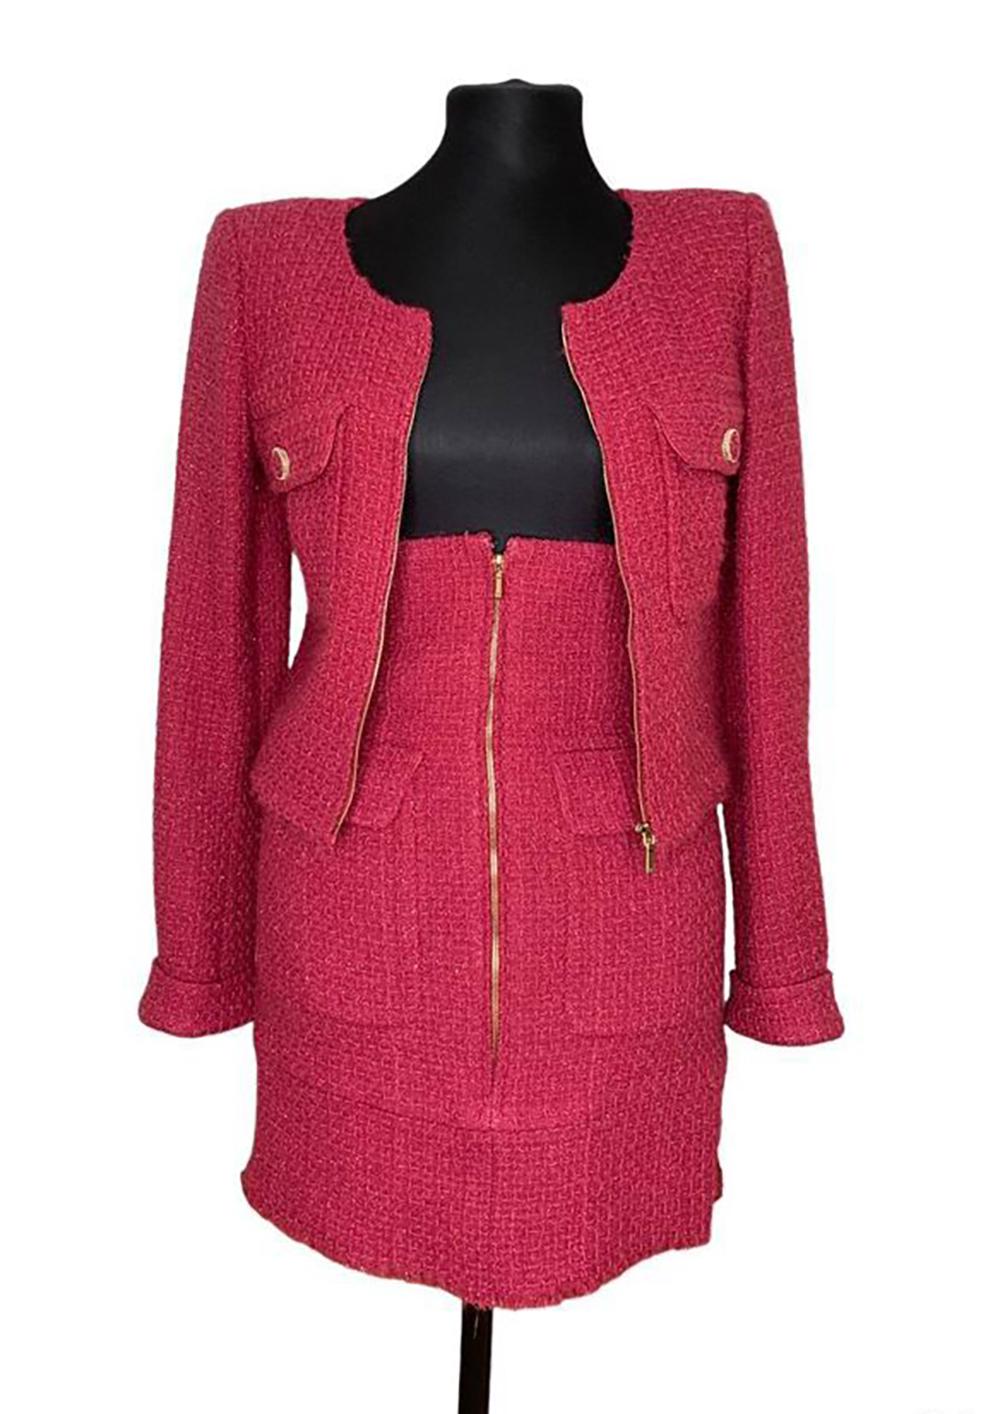 Chanel Ad Campaign Lesage Tweed Jacket and Skirt Ensemble For Sale 4